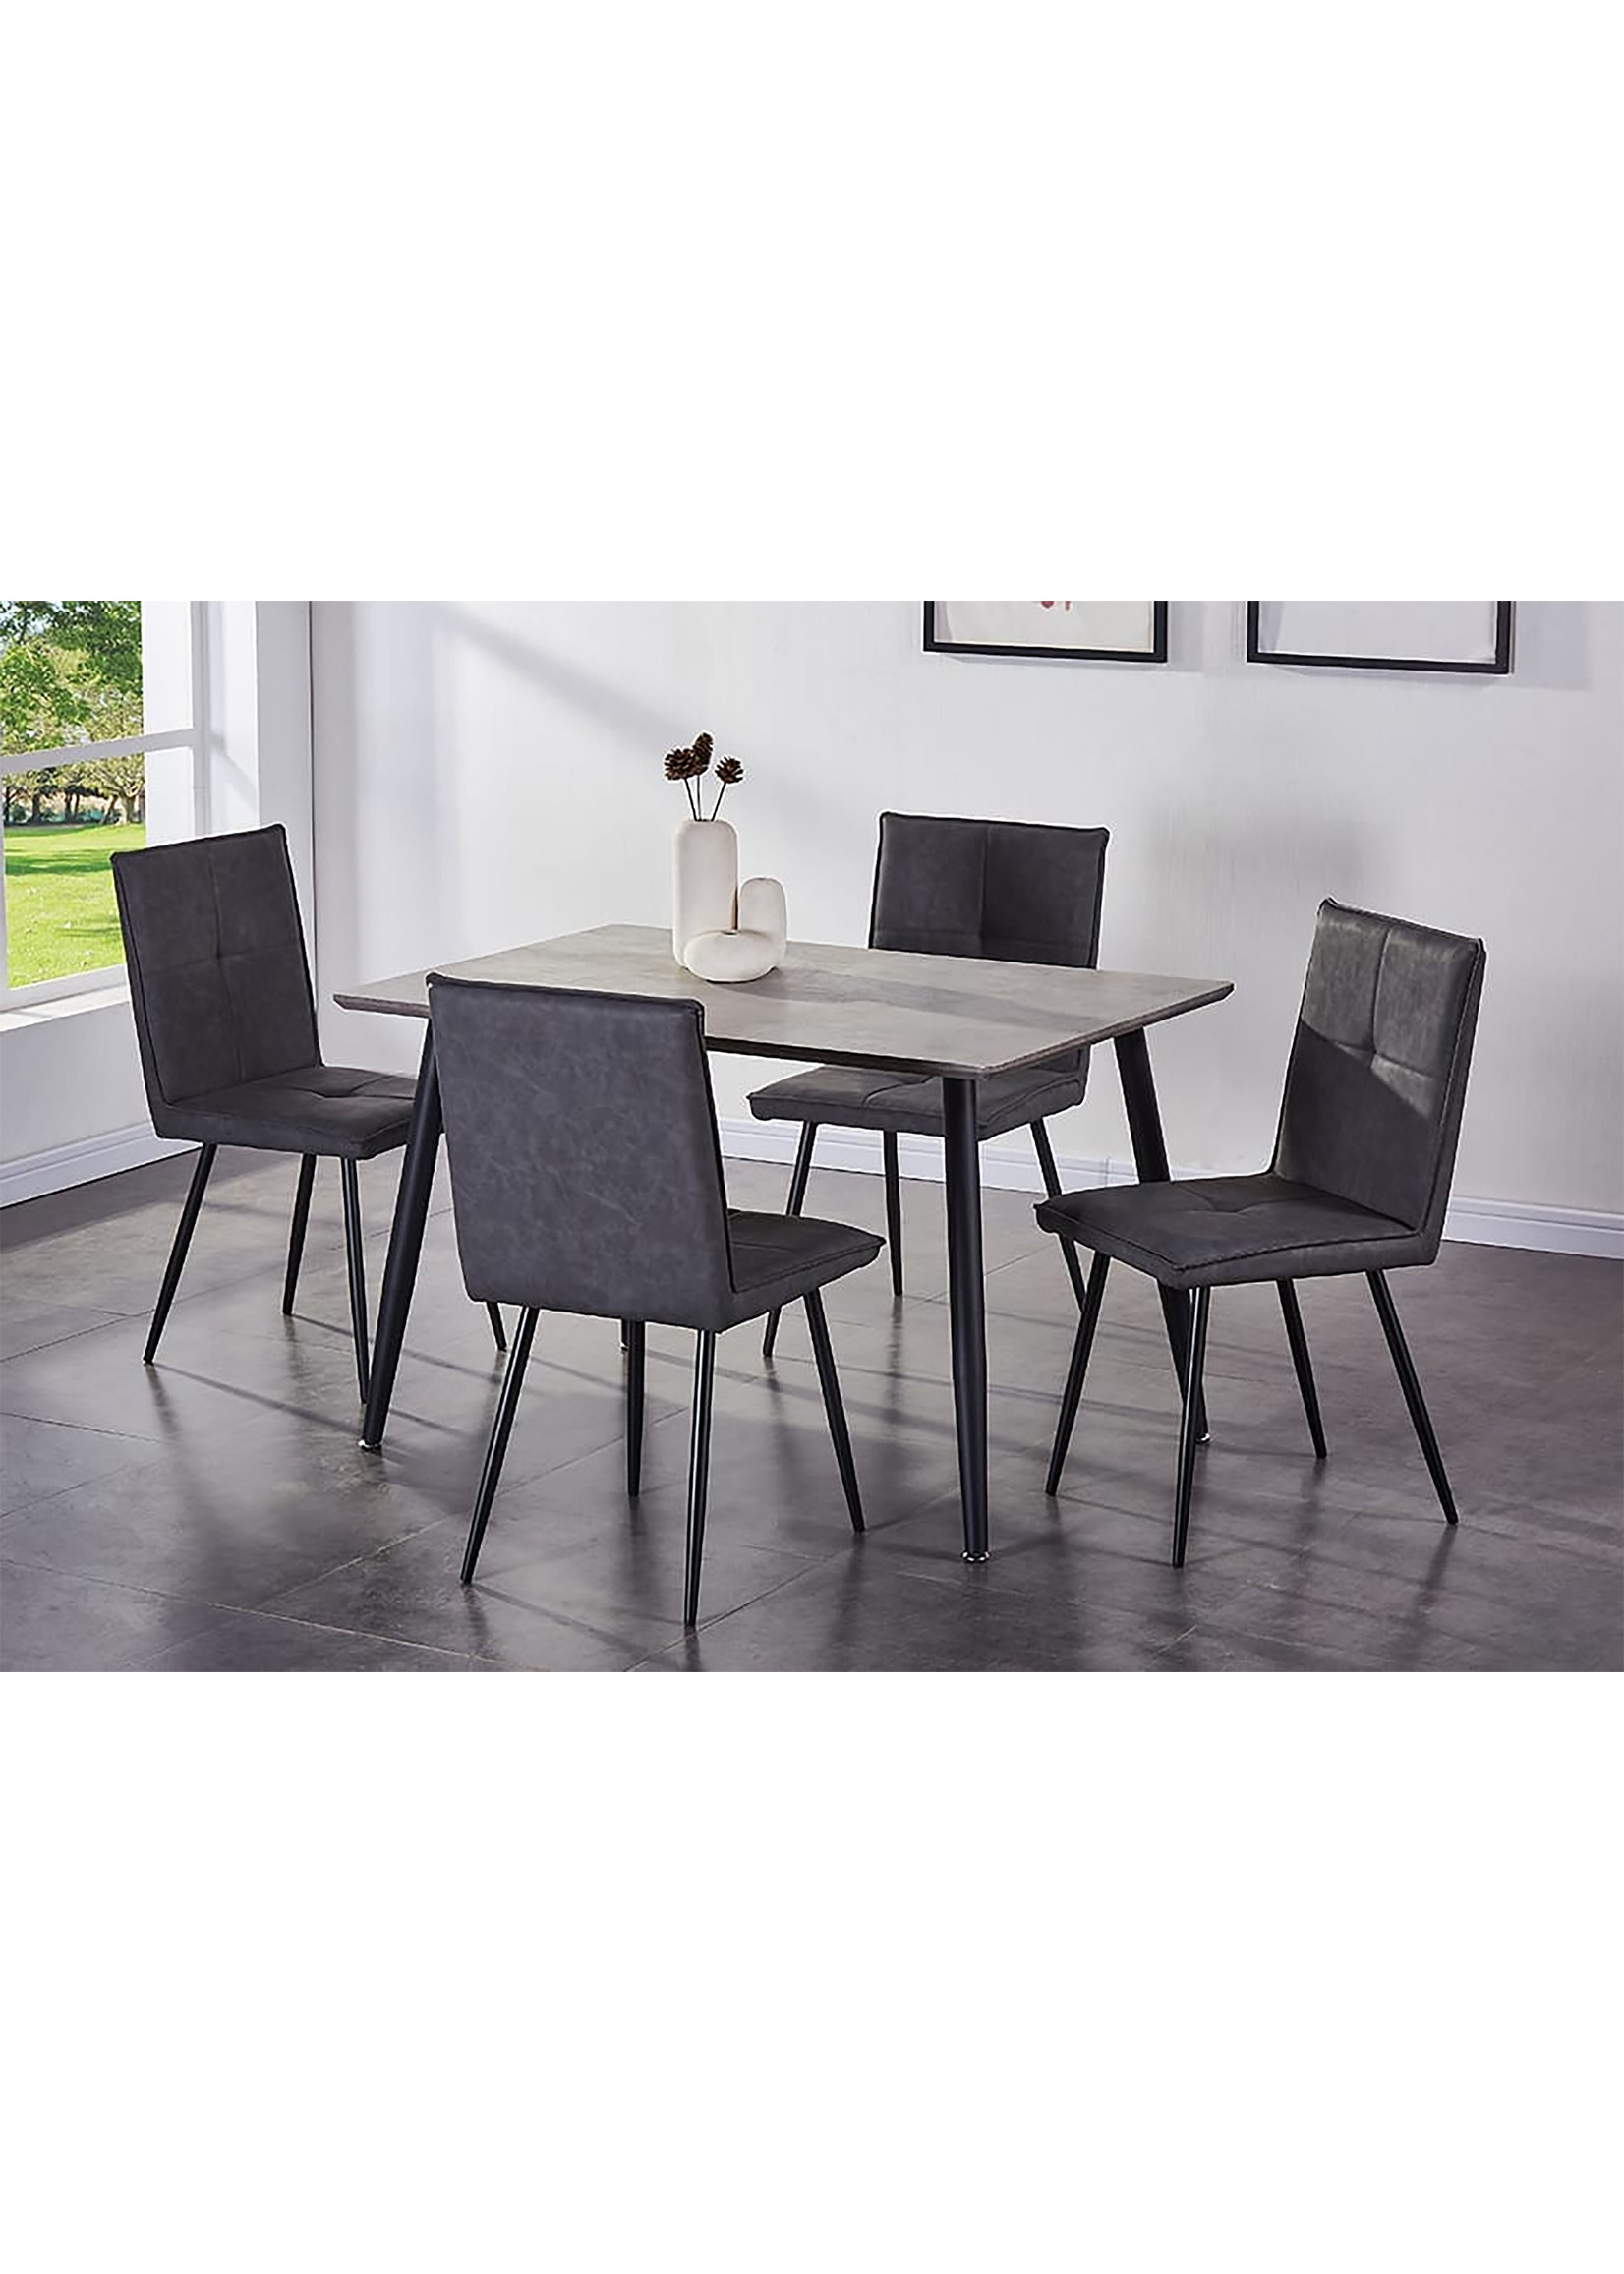 Grey Dining Chair Square Shape